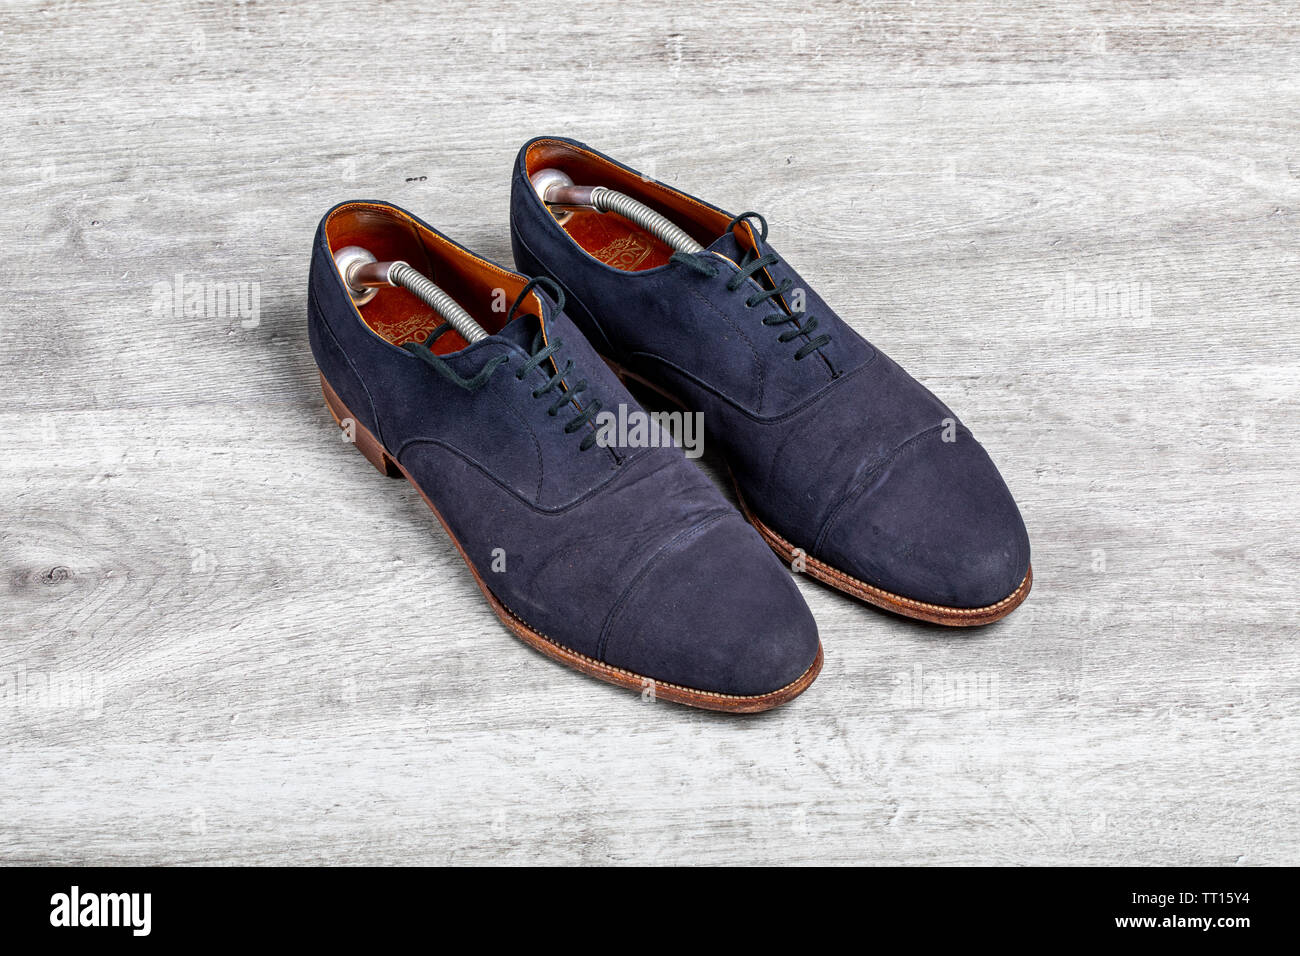 Blue suede shoes with shoe trees in Stock Photo